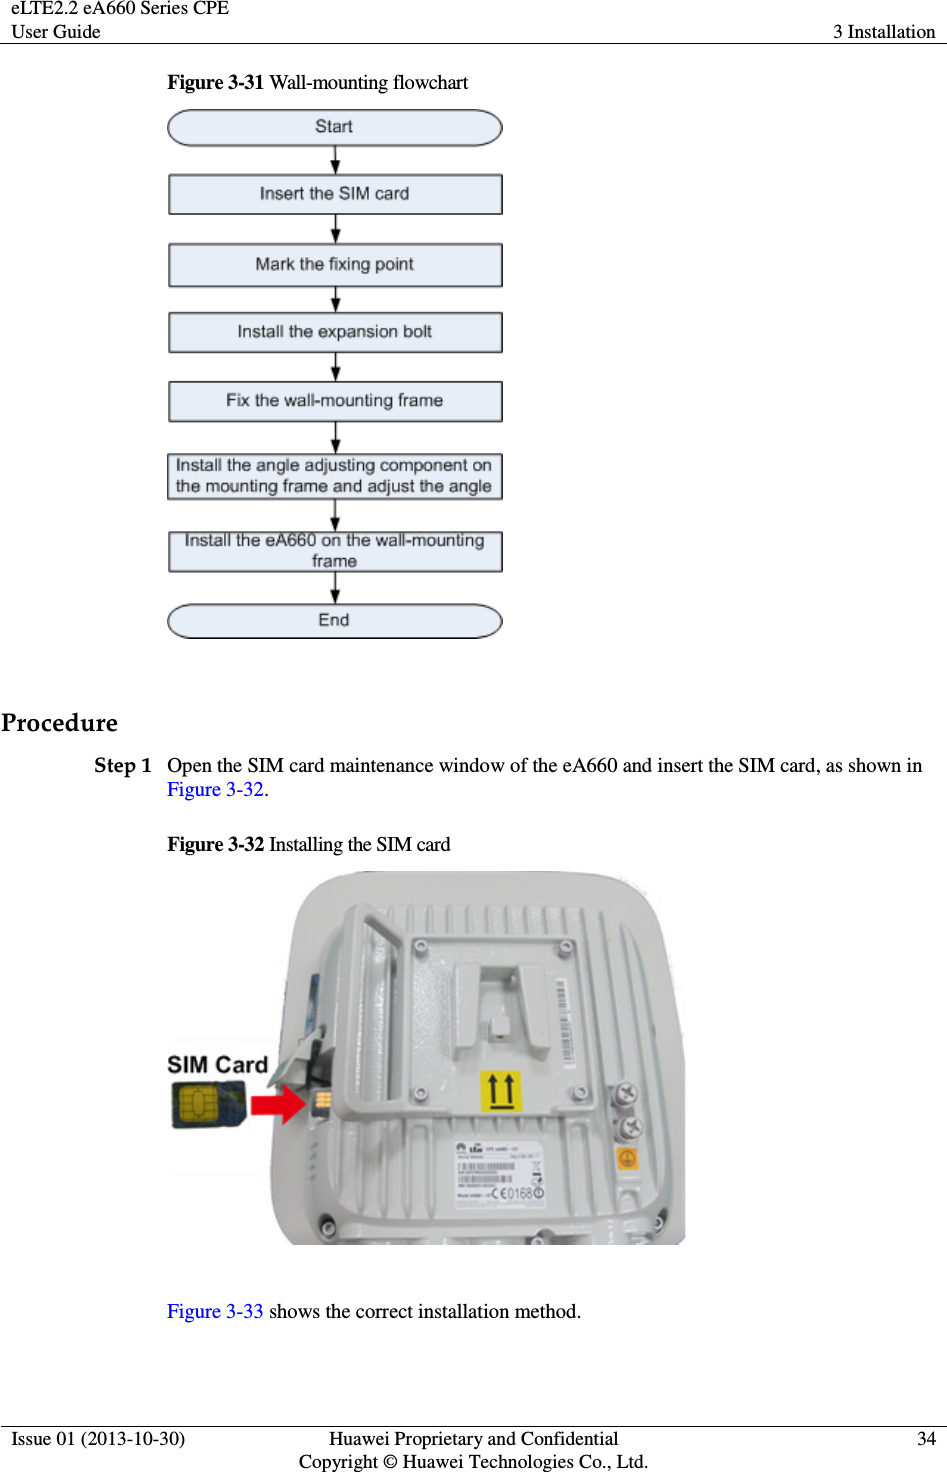 eLTE2.2 eA660 Series CPE User Guide  3 Installation  Issue 01 (2013-10-30)  Huawei Proprietary and Confidential                                     Copyright © Huawei Technologies Co., Ltd. 34  Figure 3-31 Wall-mounting flowchart   Procedure Step 1 Open the SIM card maintenance window of the eA660 and insert the SIM card, as shown in Figure 3-32. Figure 3-32 Installing the SIM card   Figure 3-33 shows the correct installation method. 